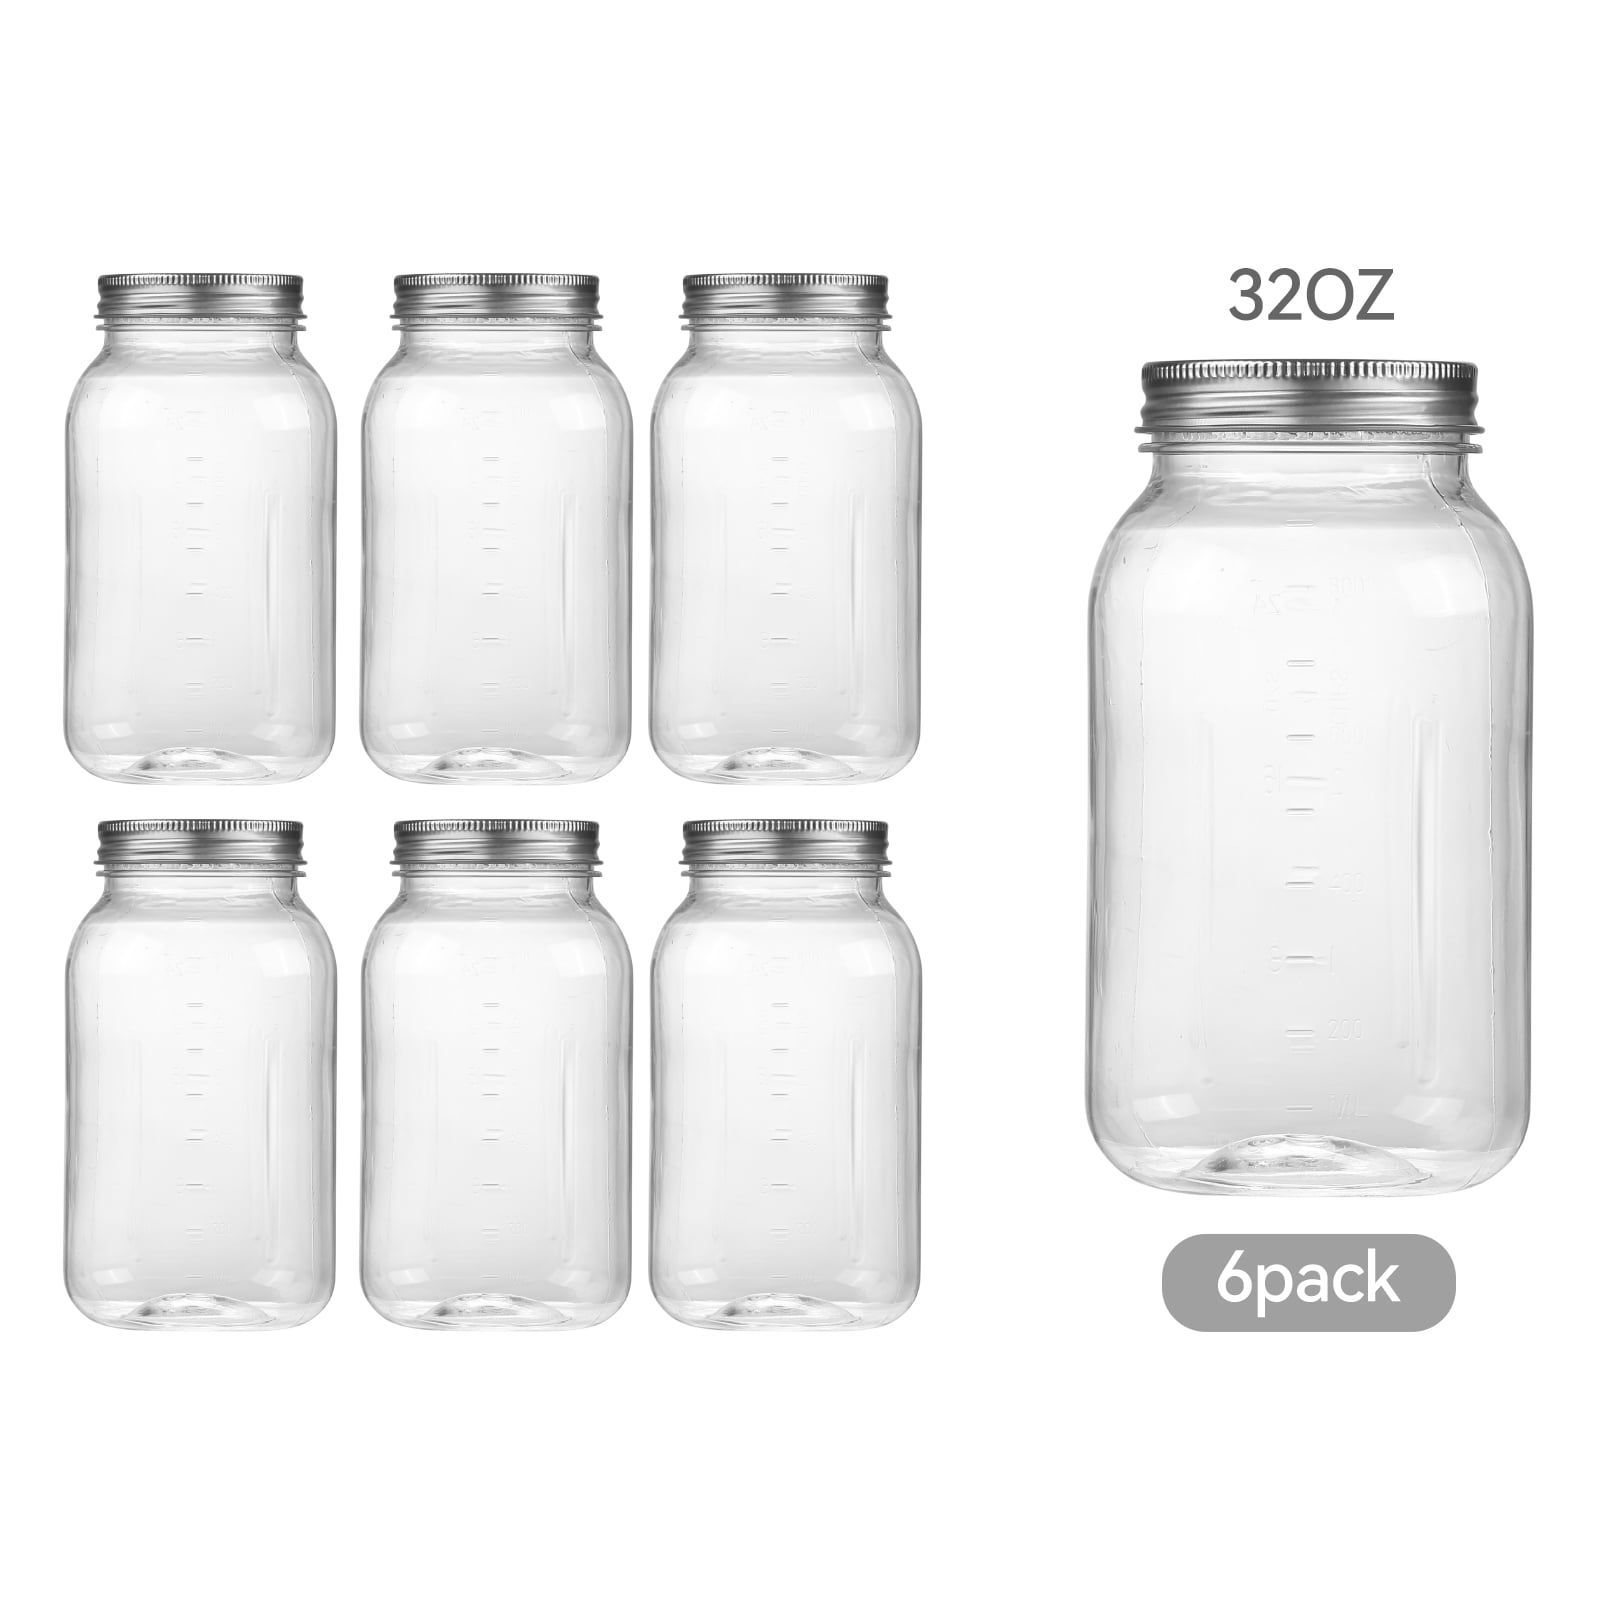 Jarming Collections 16 oz Mason Jars with Lids (BPA Free) Pint Mason Jars  with Plastic Lids 16 oz – Perfect for Overnight Oats Storing Liquids,  Sauces